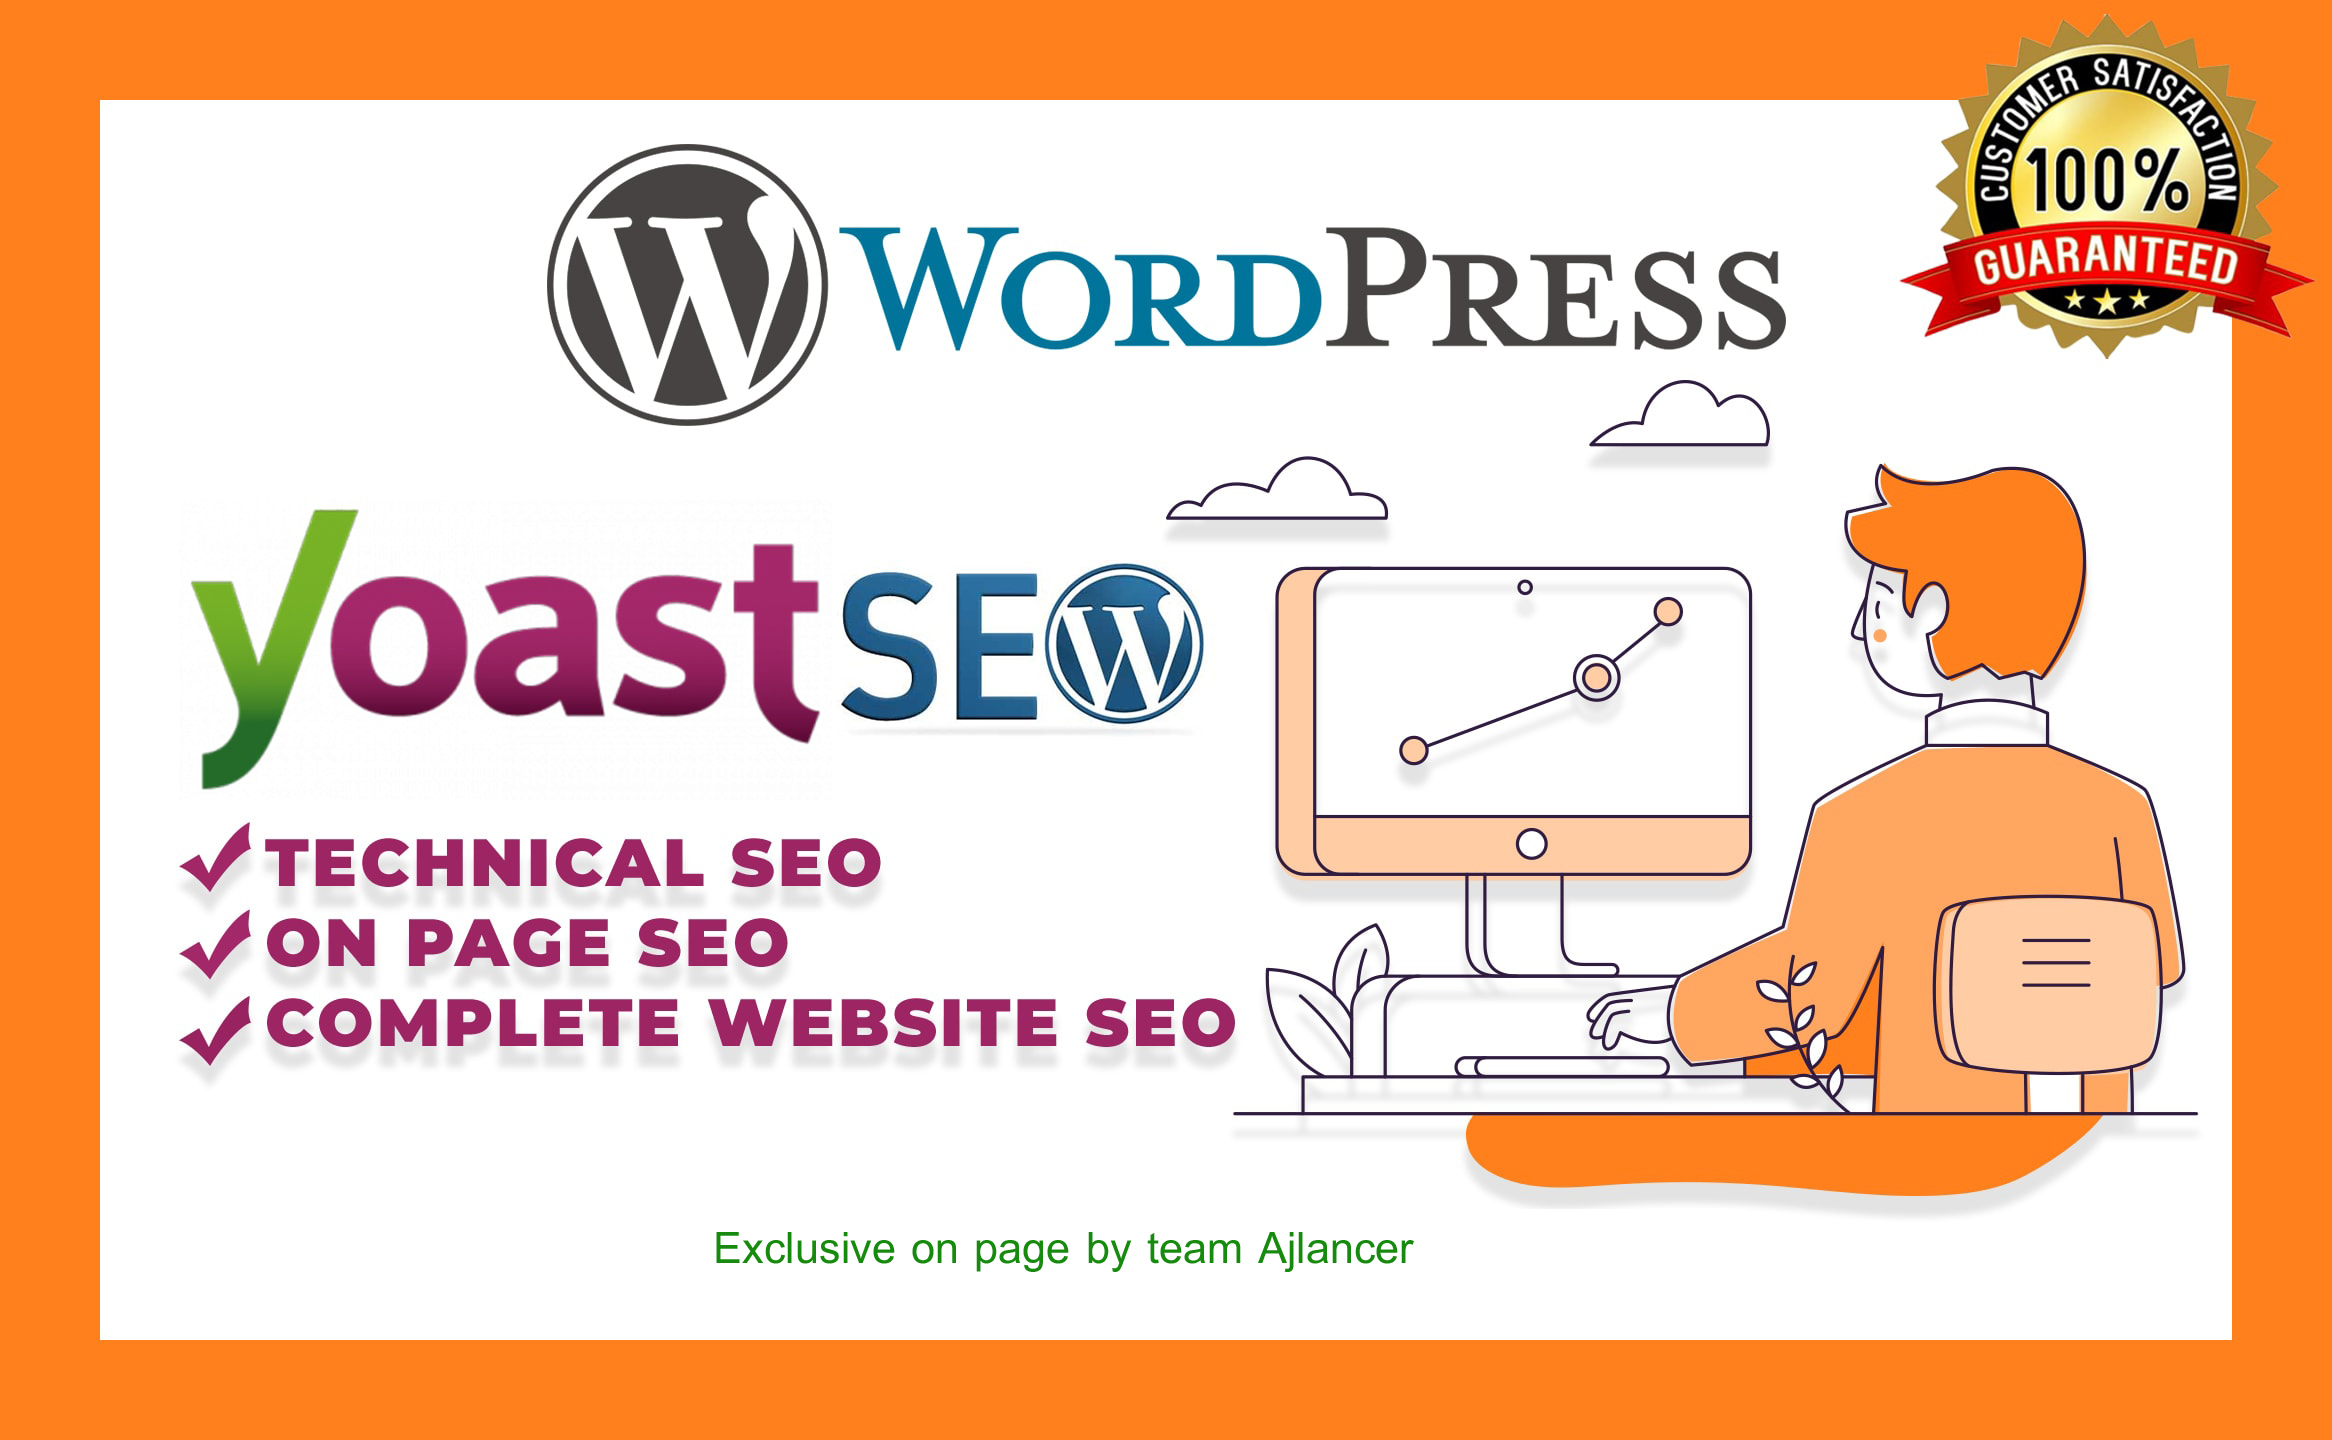 I will do yoast on page SEO with green article readability